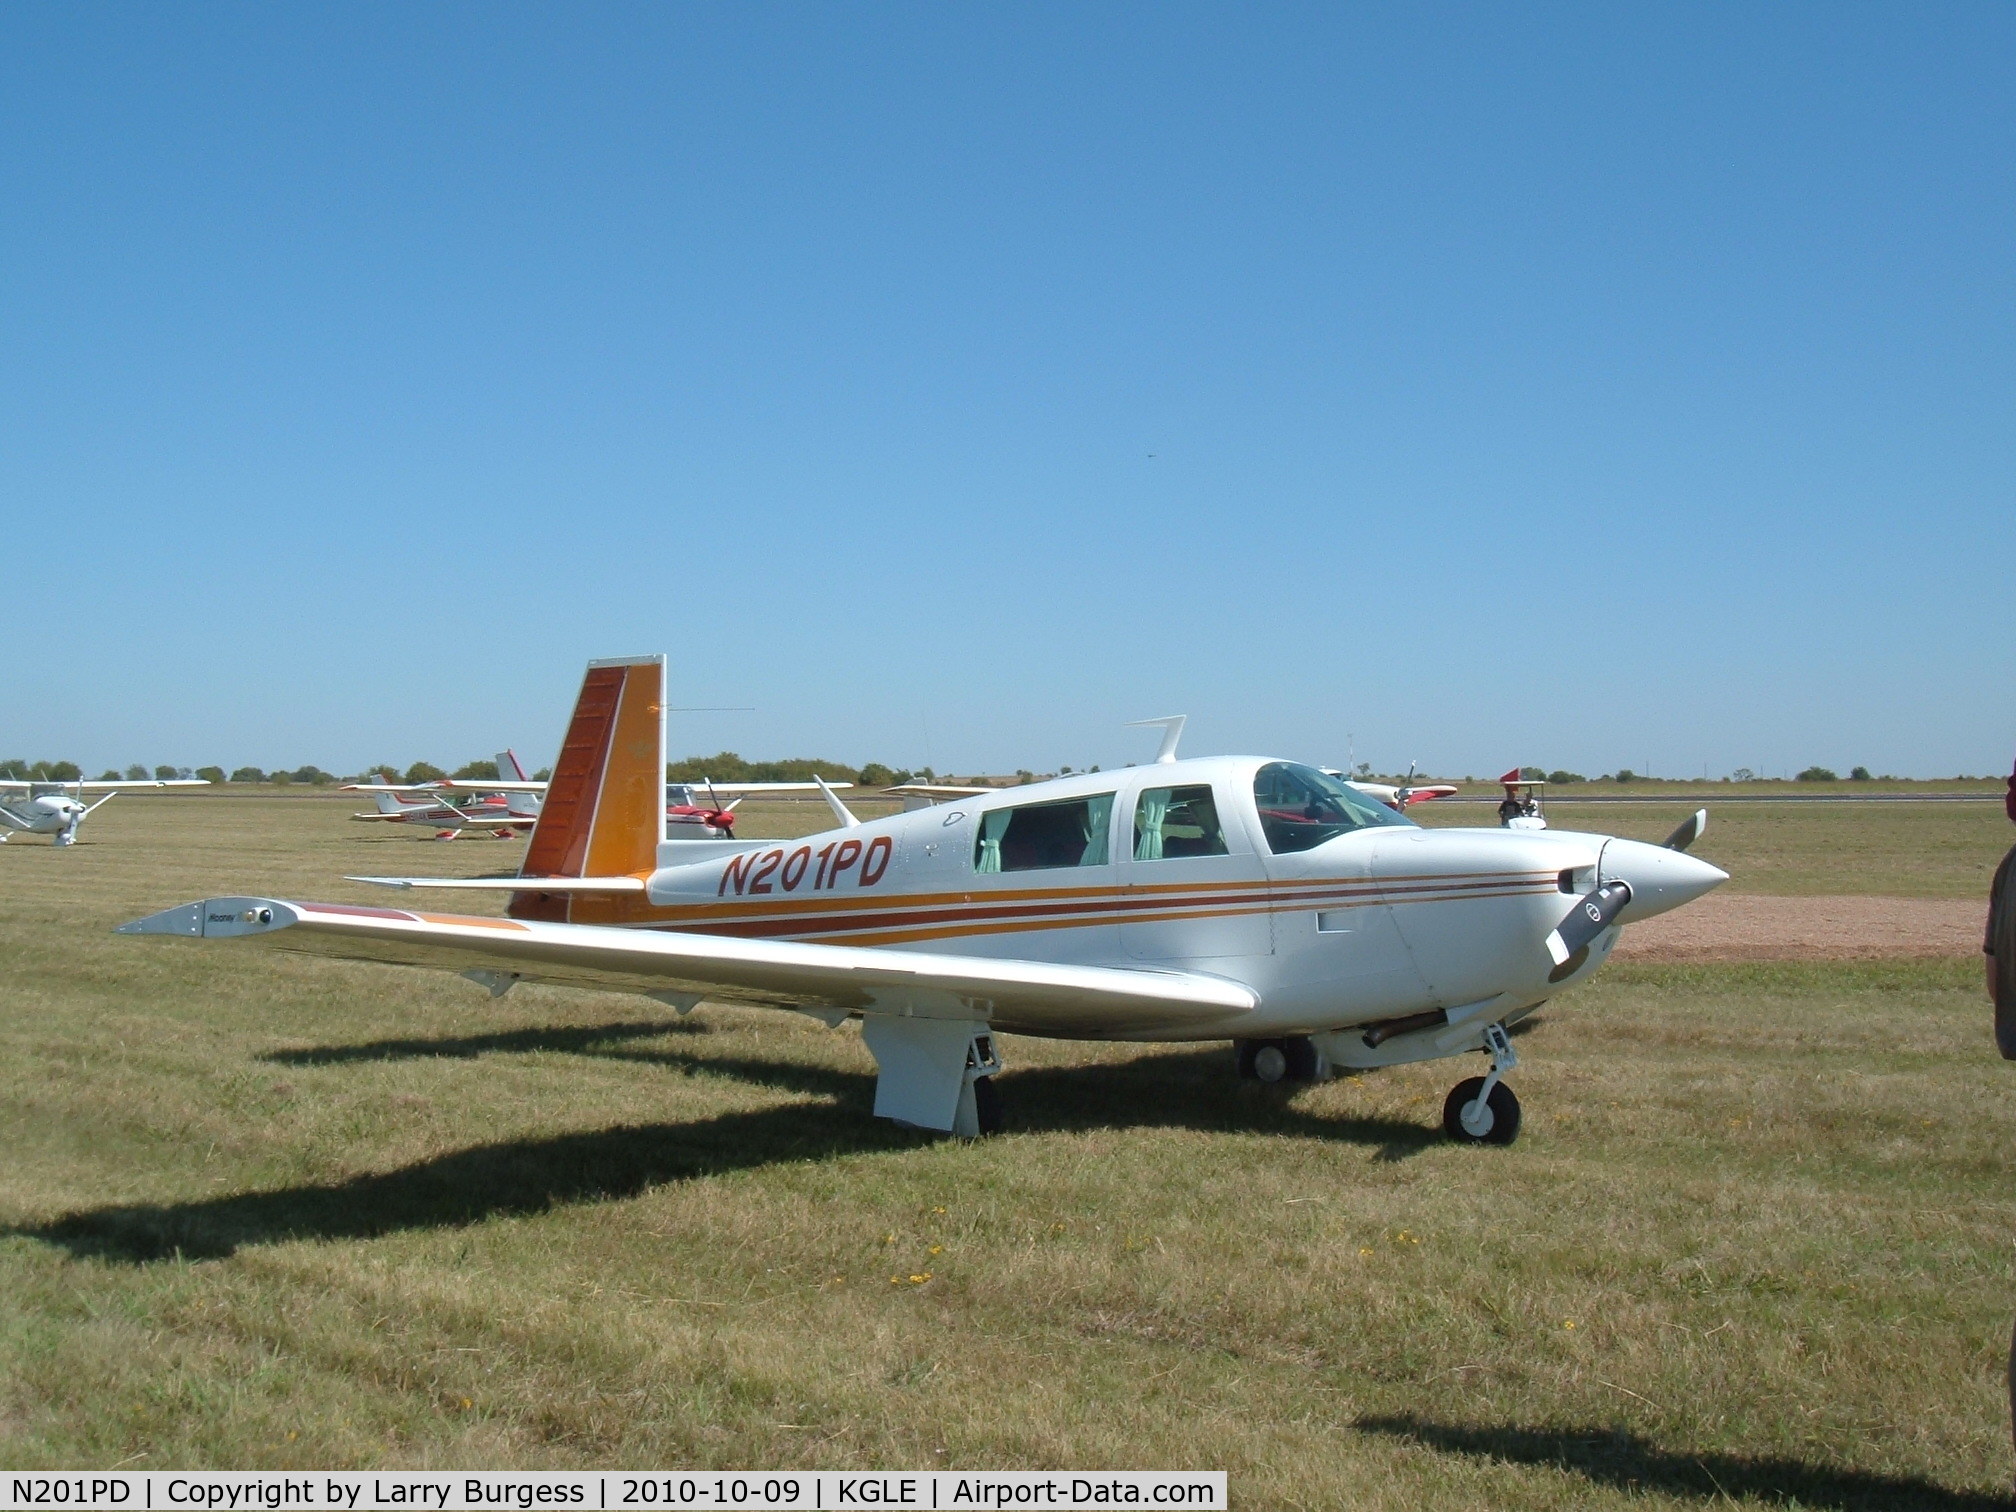 N201PD, 1977 Mooney M20J 201 C/N 24-0170, At the Fall Festival of Flight — the 48th Annual Fly-in at the Gainesville Municipal Airport hosted by the Texas Chapter of the Antique Airplane Association